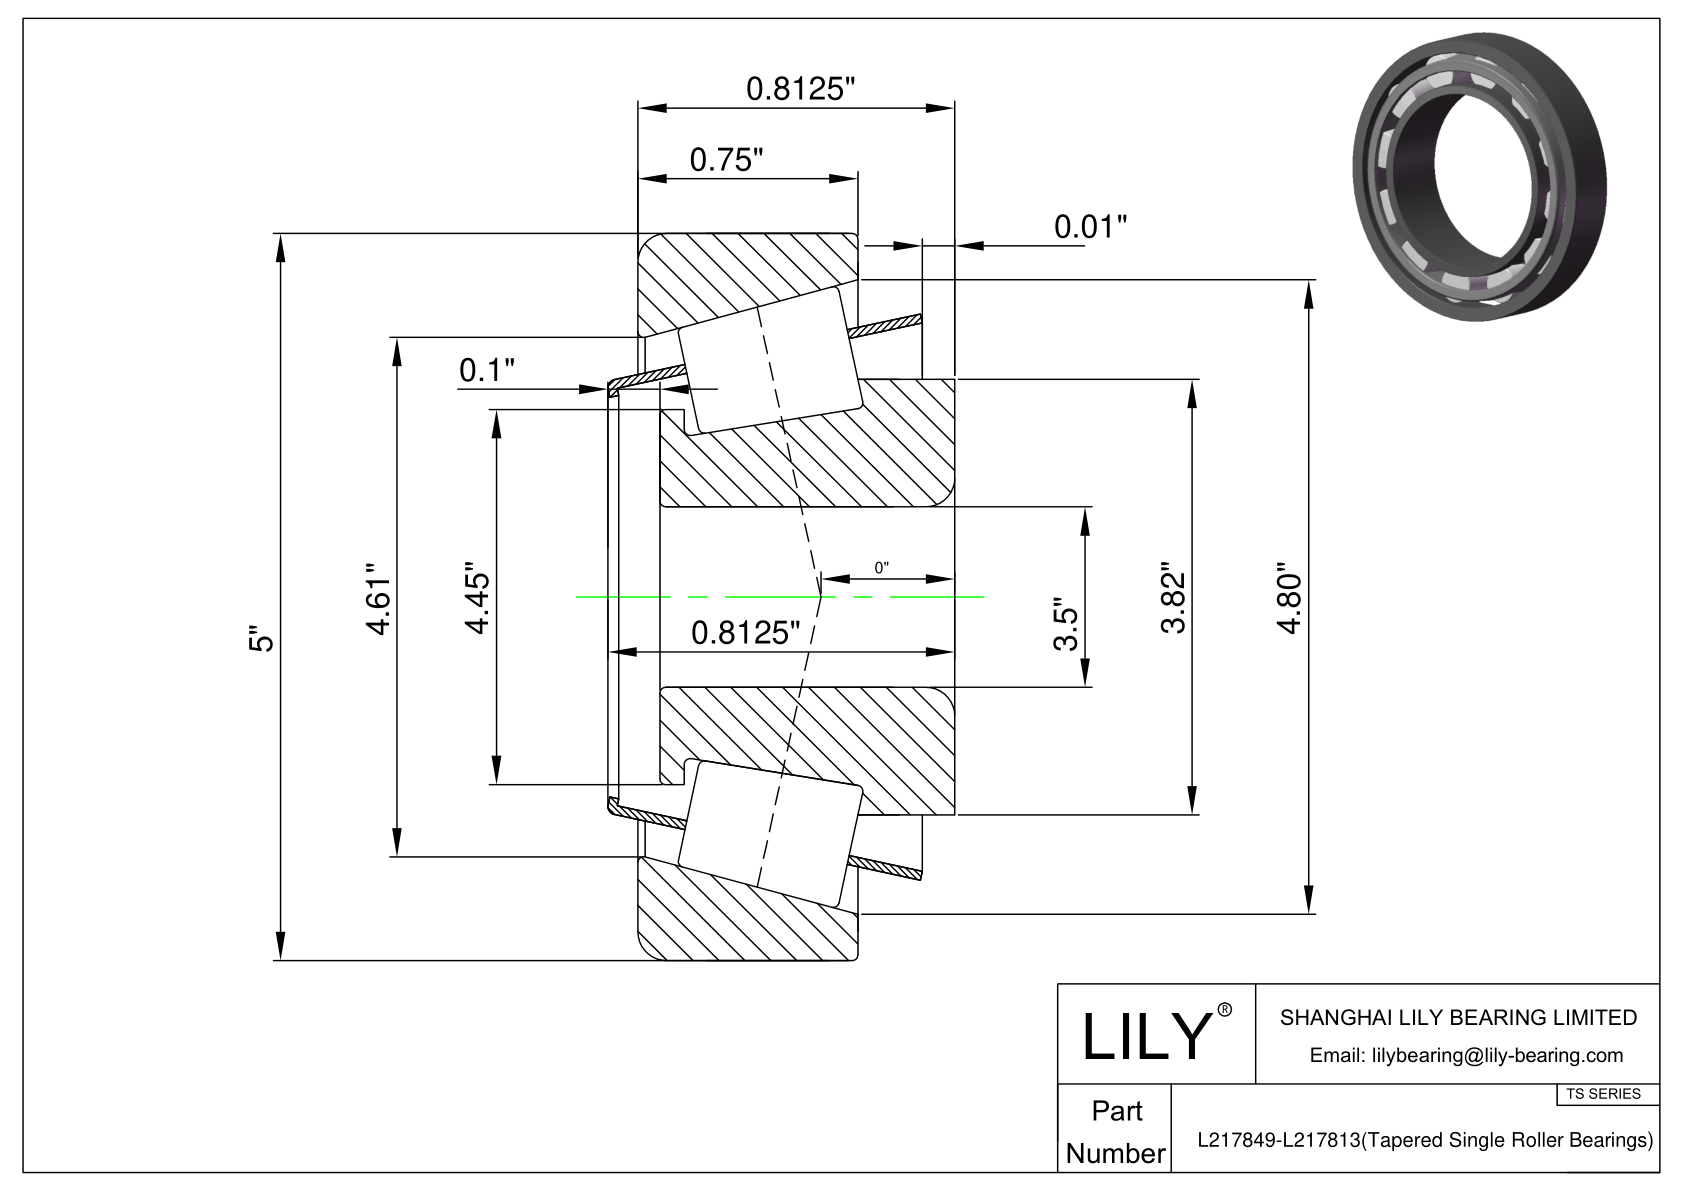 L217849-L217813 TS (Tapered Single Roller Bearings) (Imperial) cad drawing